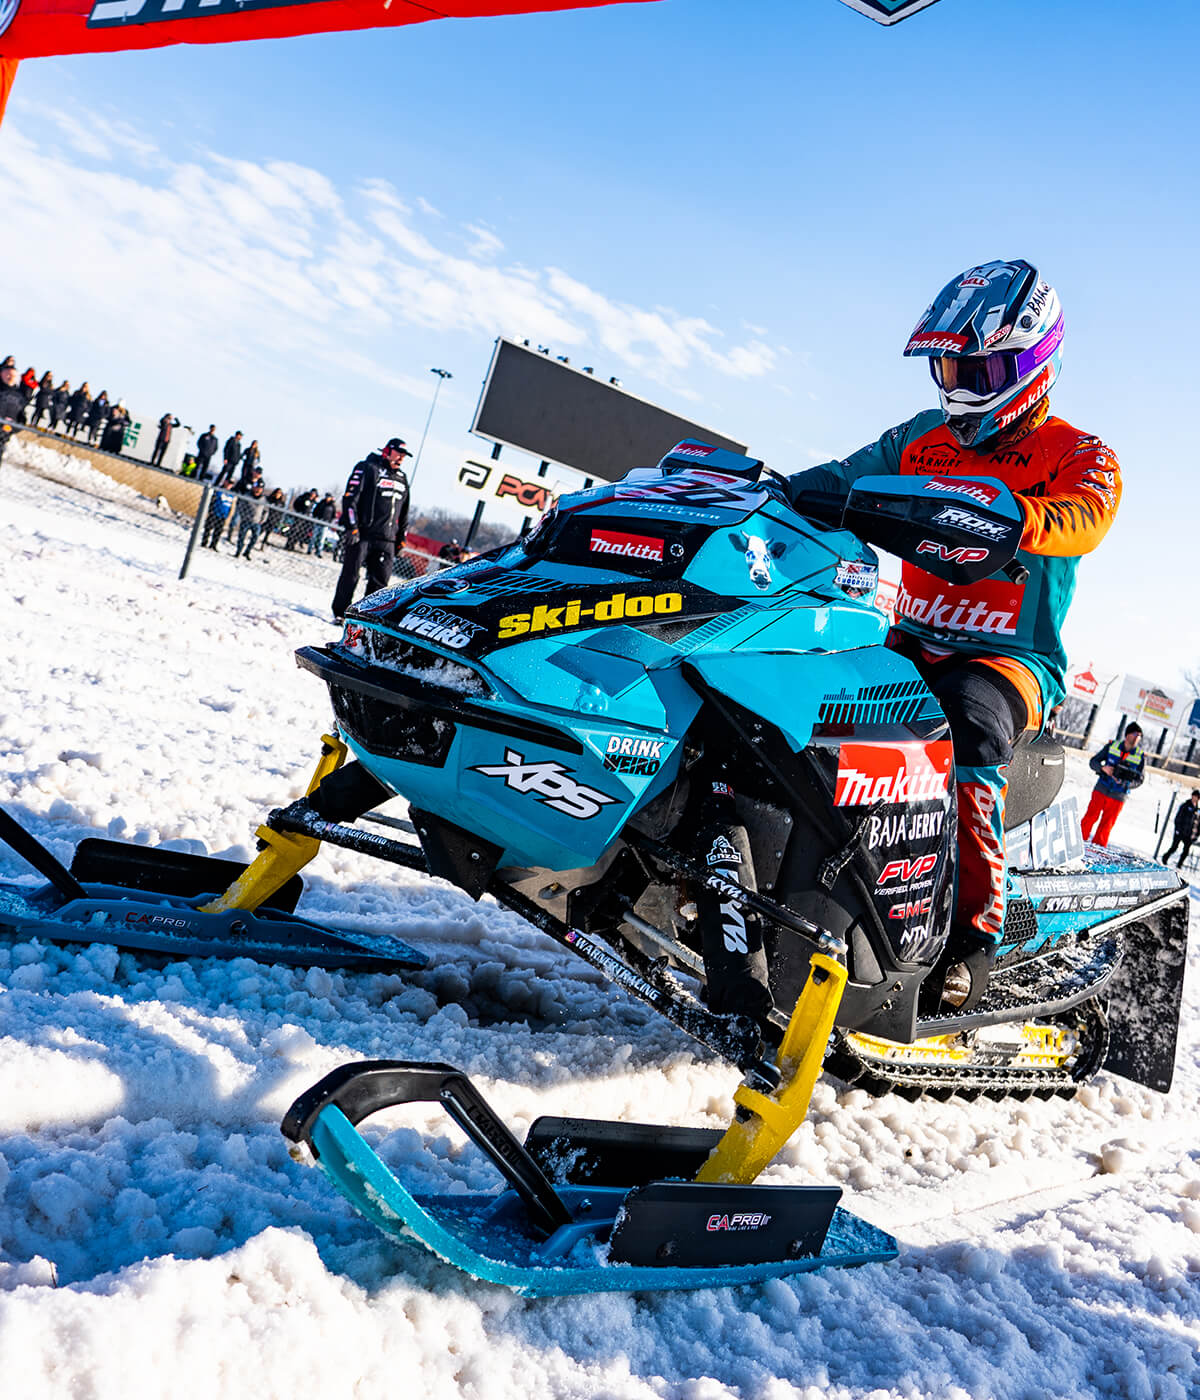 Professional Snocross racer on Ski-Doo snowmobile with custom Sky Blue C&A Pro XT skis and black C&A Pro cornering kits